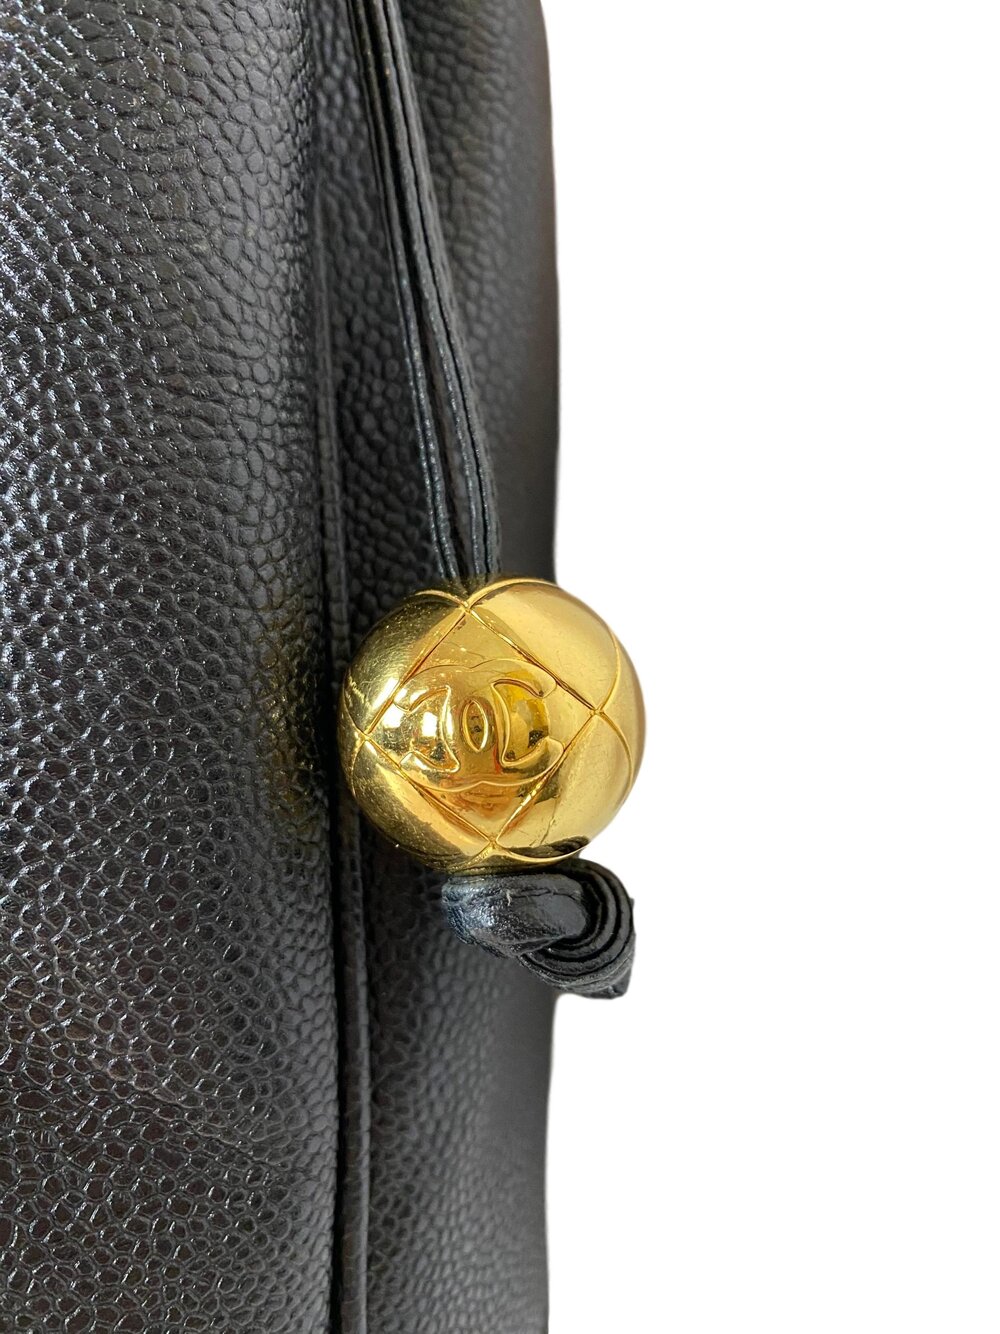 Chanel Black Lambskin Leather CC Zip Around Purse with Gold Ball